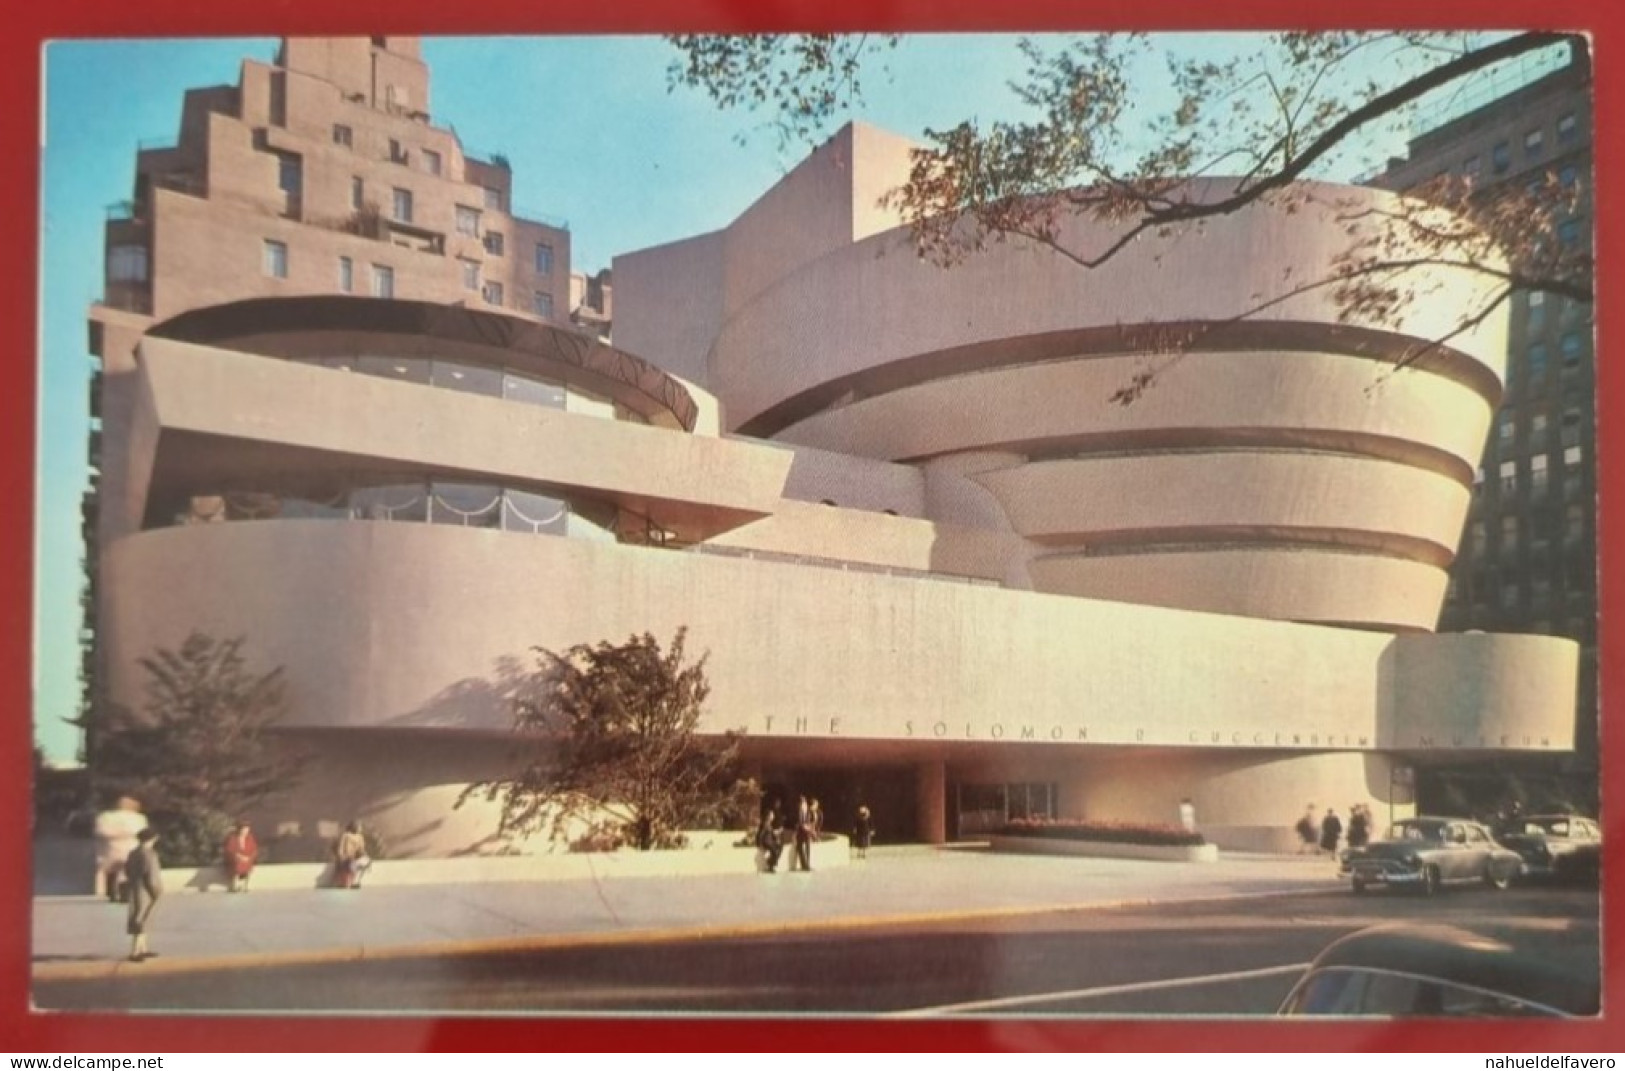 Uncirculated Postcard - USA - NY, NEW YORK CITY - THE SOLOMAN R. GUGGENHEIM MUSEUM - Musées